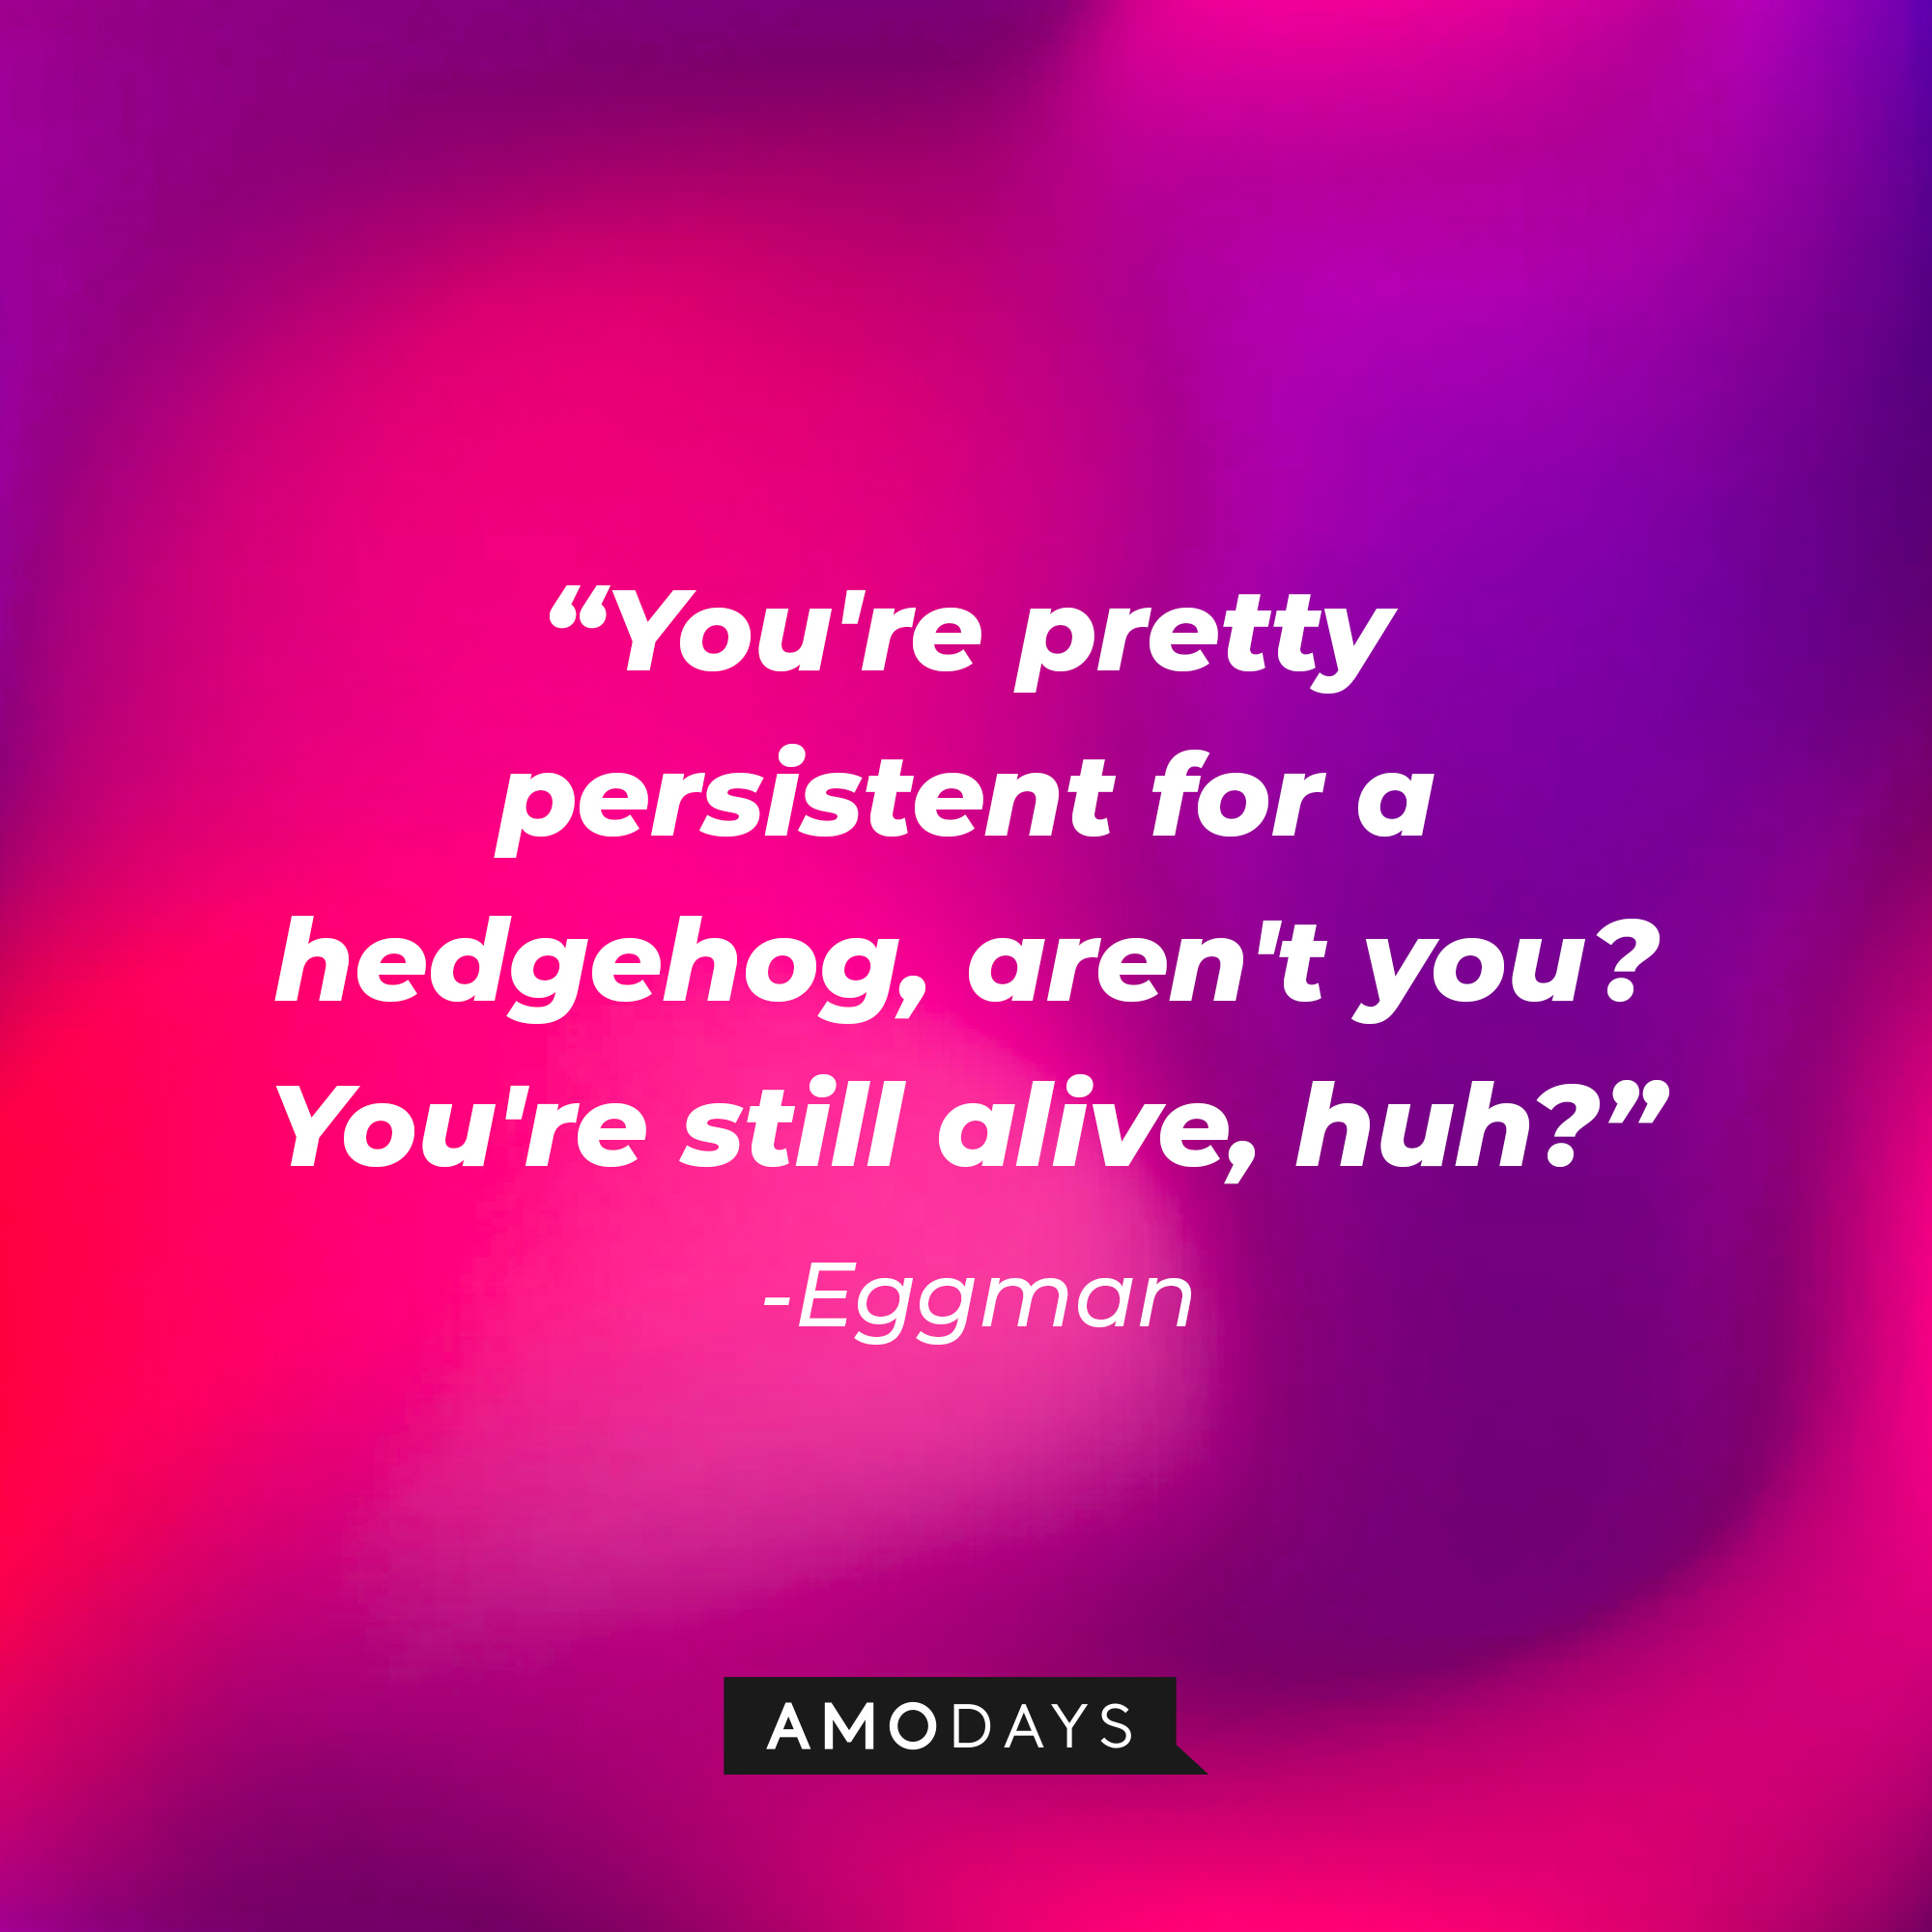 Eggman's quote: "You're pretty persistent for a hedgehog, aren't you? You're still alive, huh?"  | Source: Amodays